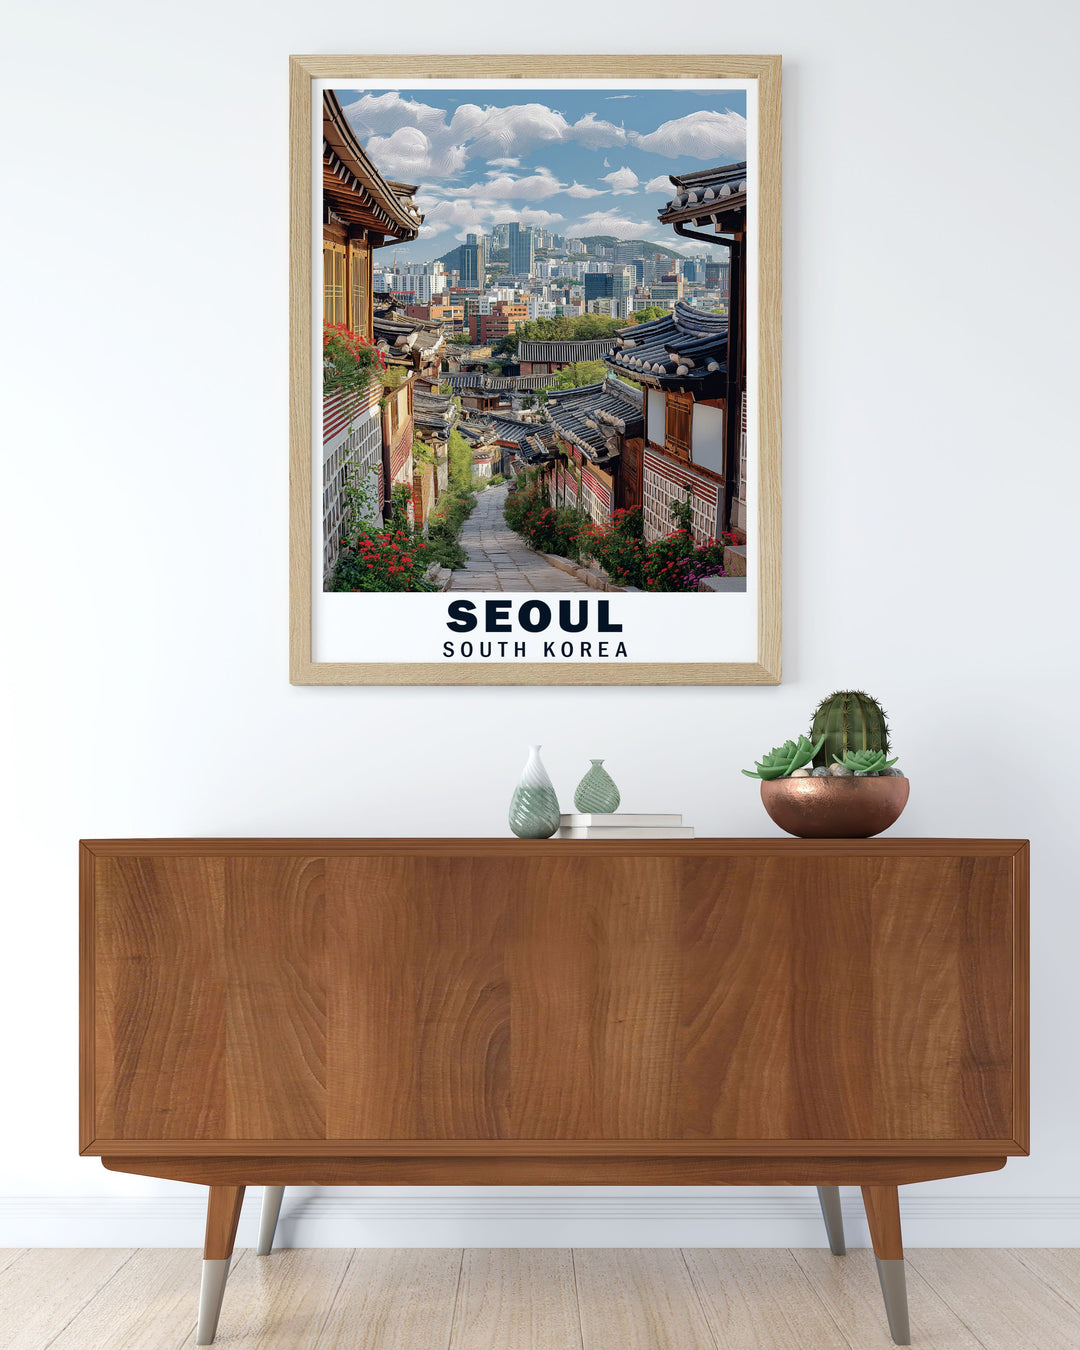 Featuring the dynamic skyline of Seoul, this poster highlights the seamless blend of old and new, offering a glimpse into the bustling city life of South Koreas capital, ideal for urban explorers and art lovers.